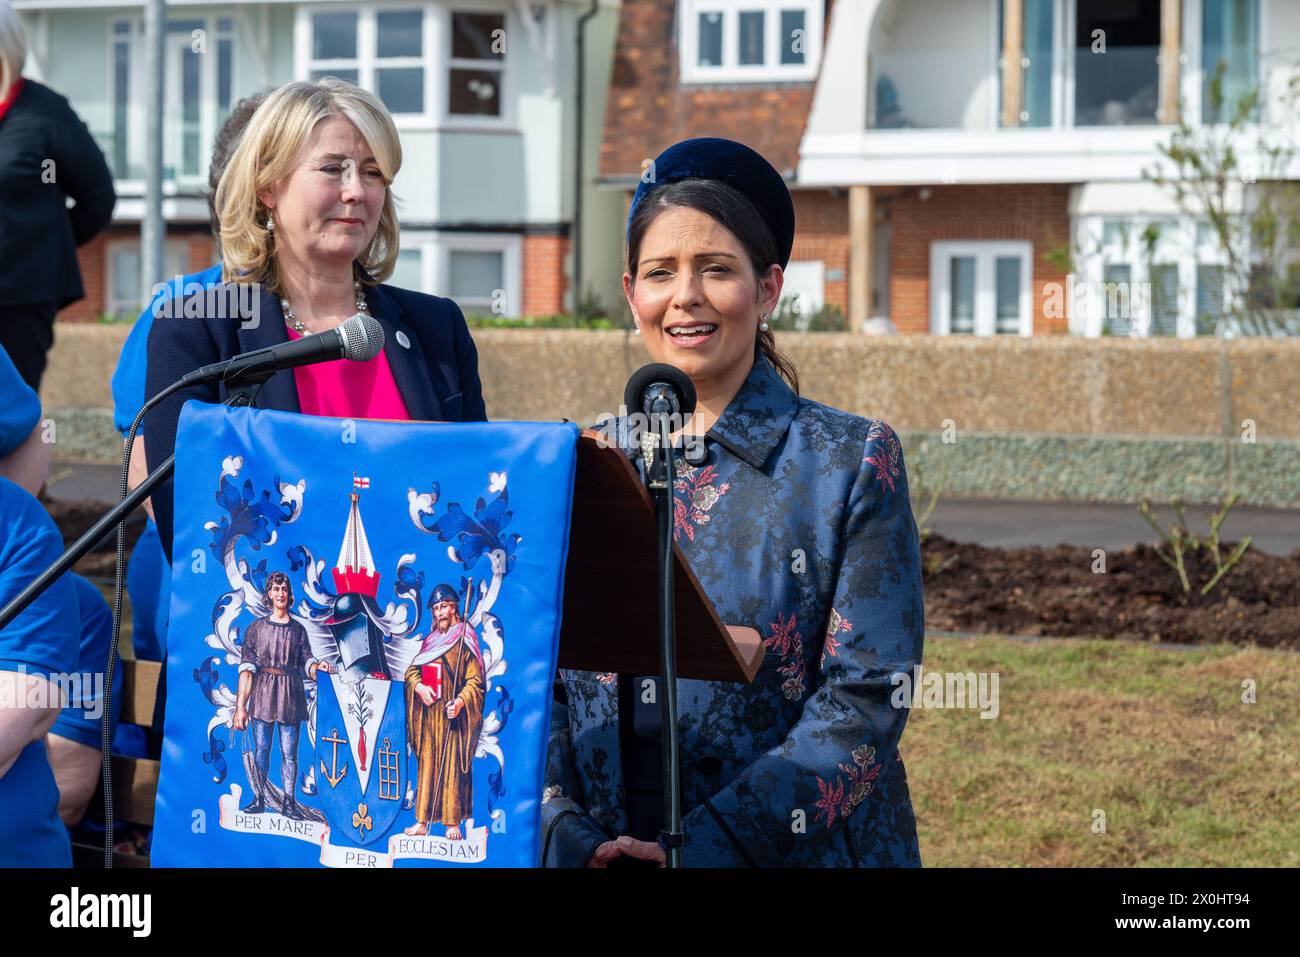 Priti Patel MP speaking at an event to unveil a statue honouring murdered Conservative MP Sir David Amess in Southend on Sea, Essex, UK Stock Photo